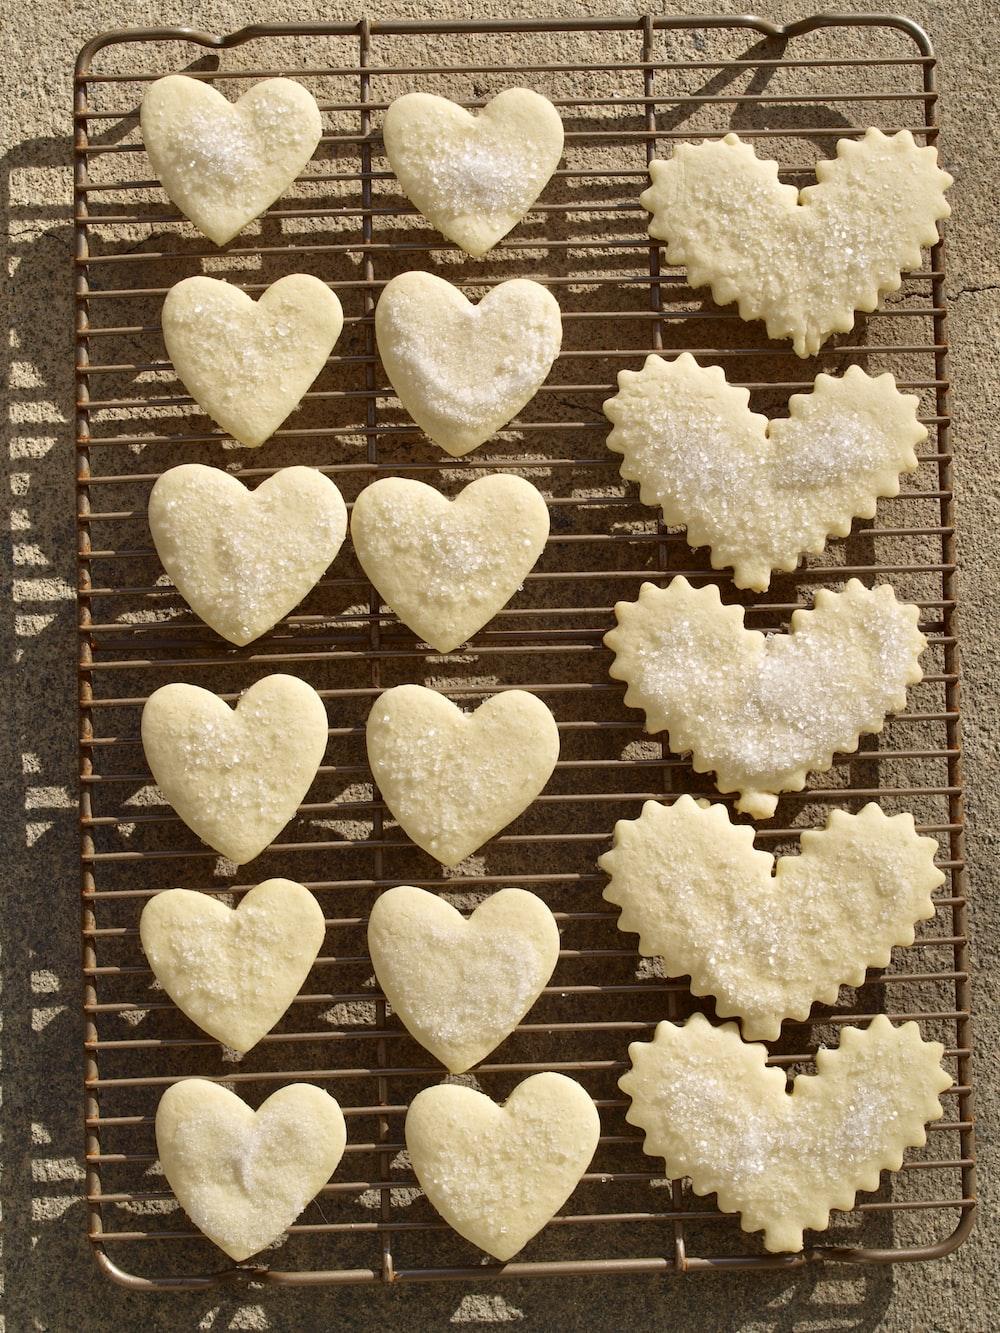 The Real Food Academy Miami classic sugar cookies recipe.